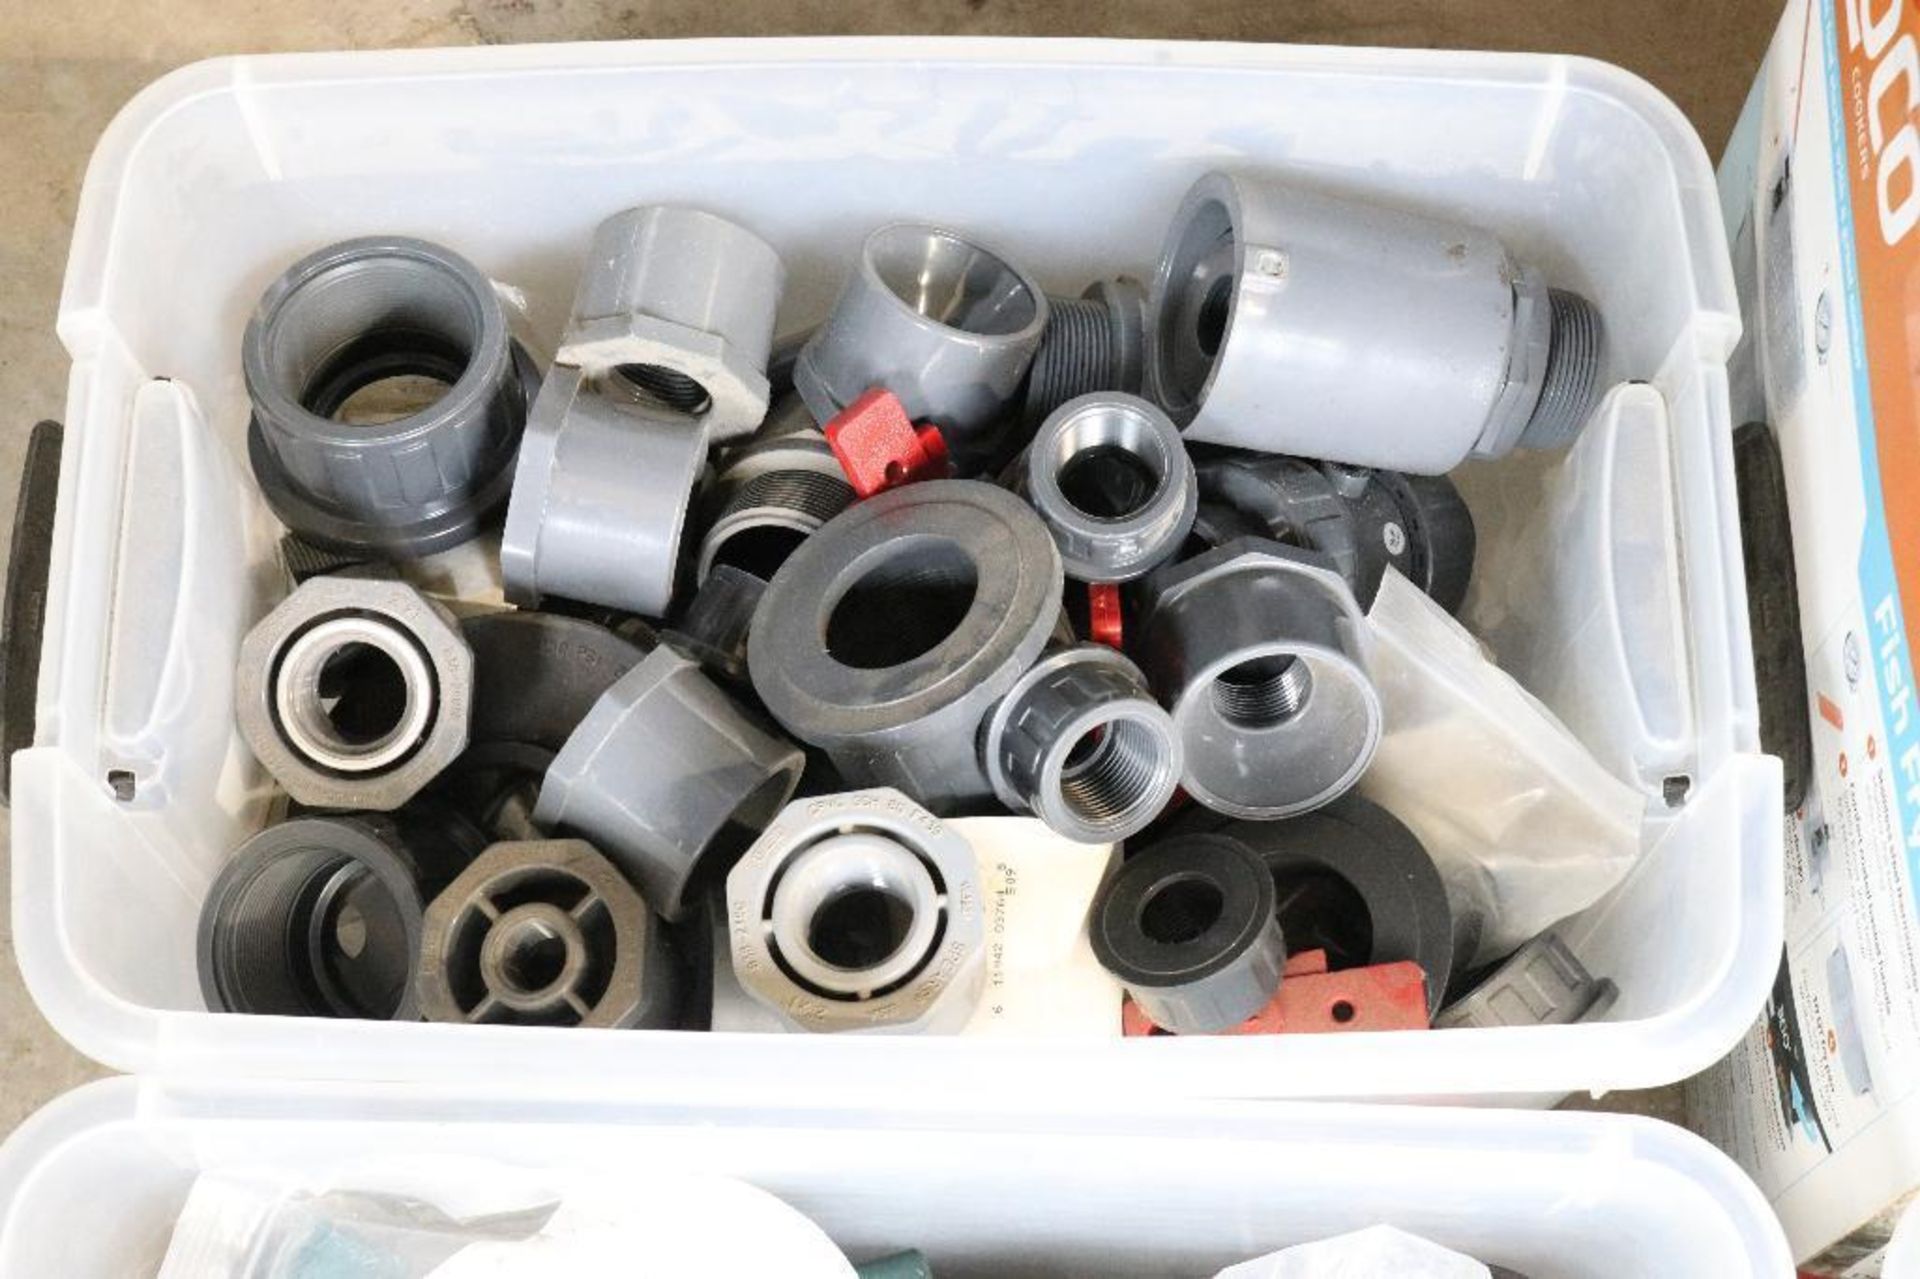 Carbon Clamps, Pipe Fittings, Stainless Fittings, Valves and More. See Photos for More Information. - Image 5 of 7